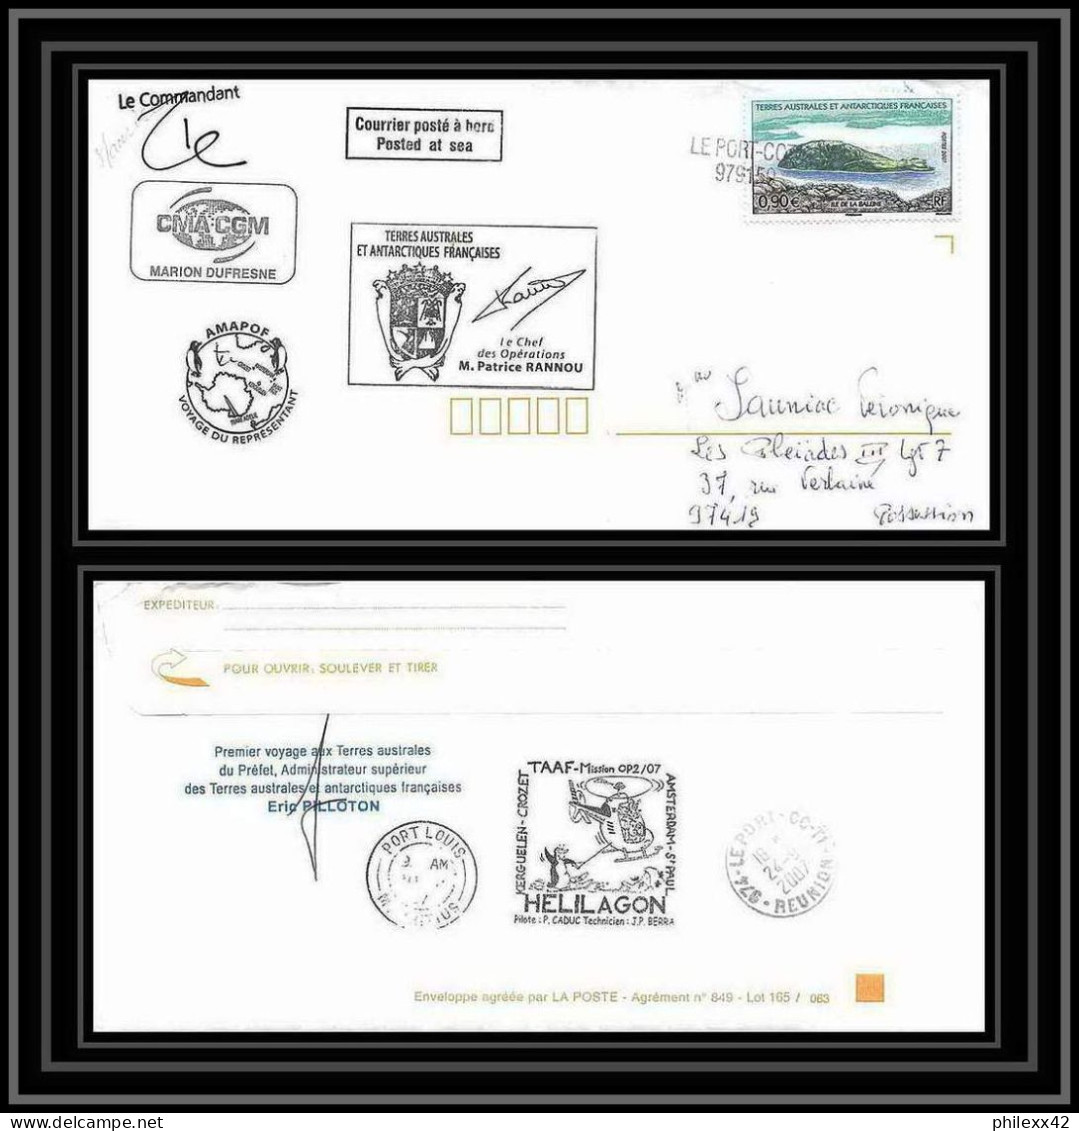 2716 ANTARCTIC Terres Australes (taaf) Dufresne 2 Signé Signed Op 2007/2 Maurice (mauritus) Helilagon Voyage Pilloton - Antarktis-Expeditionen